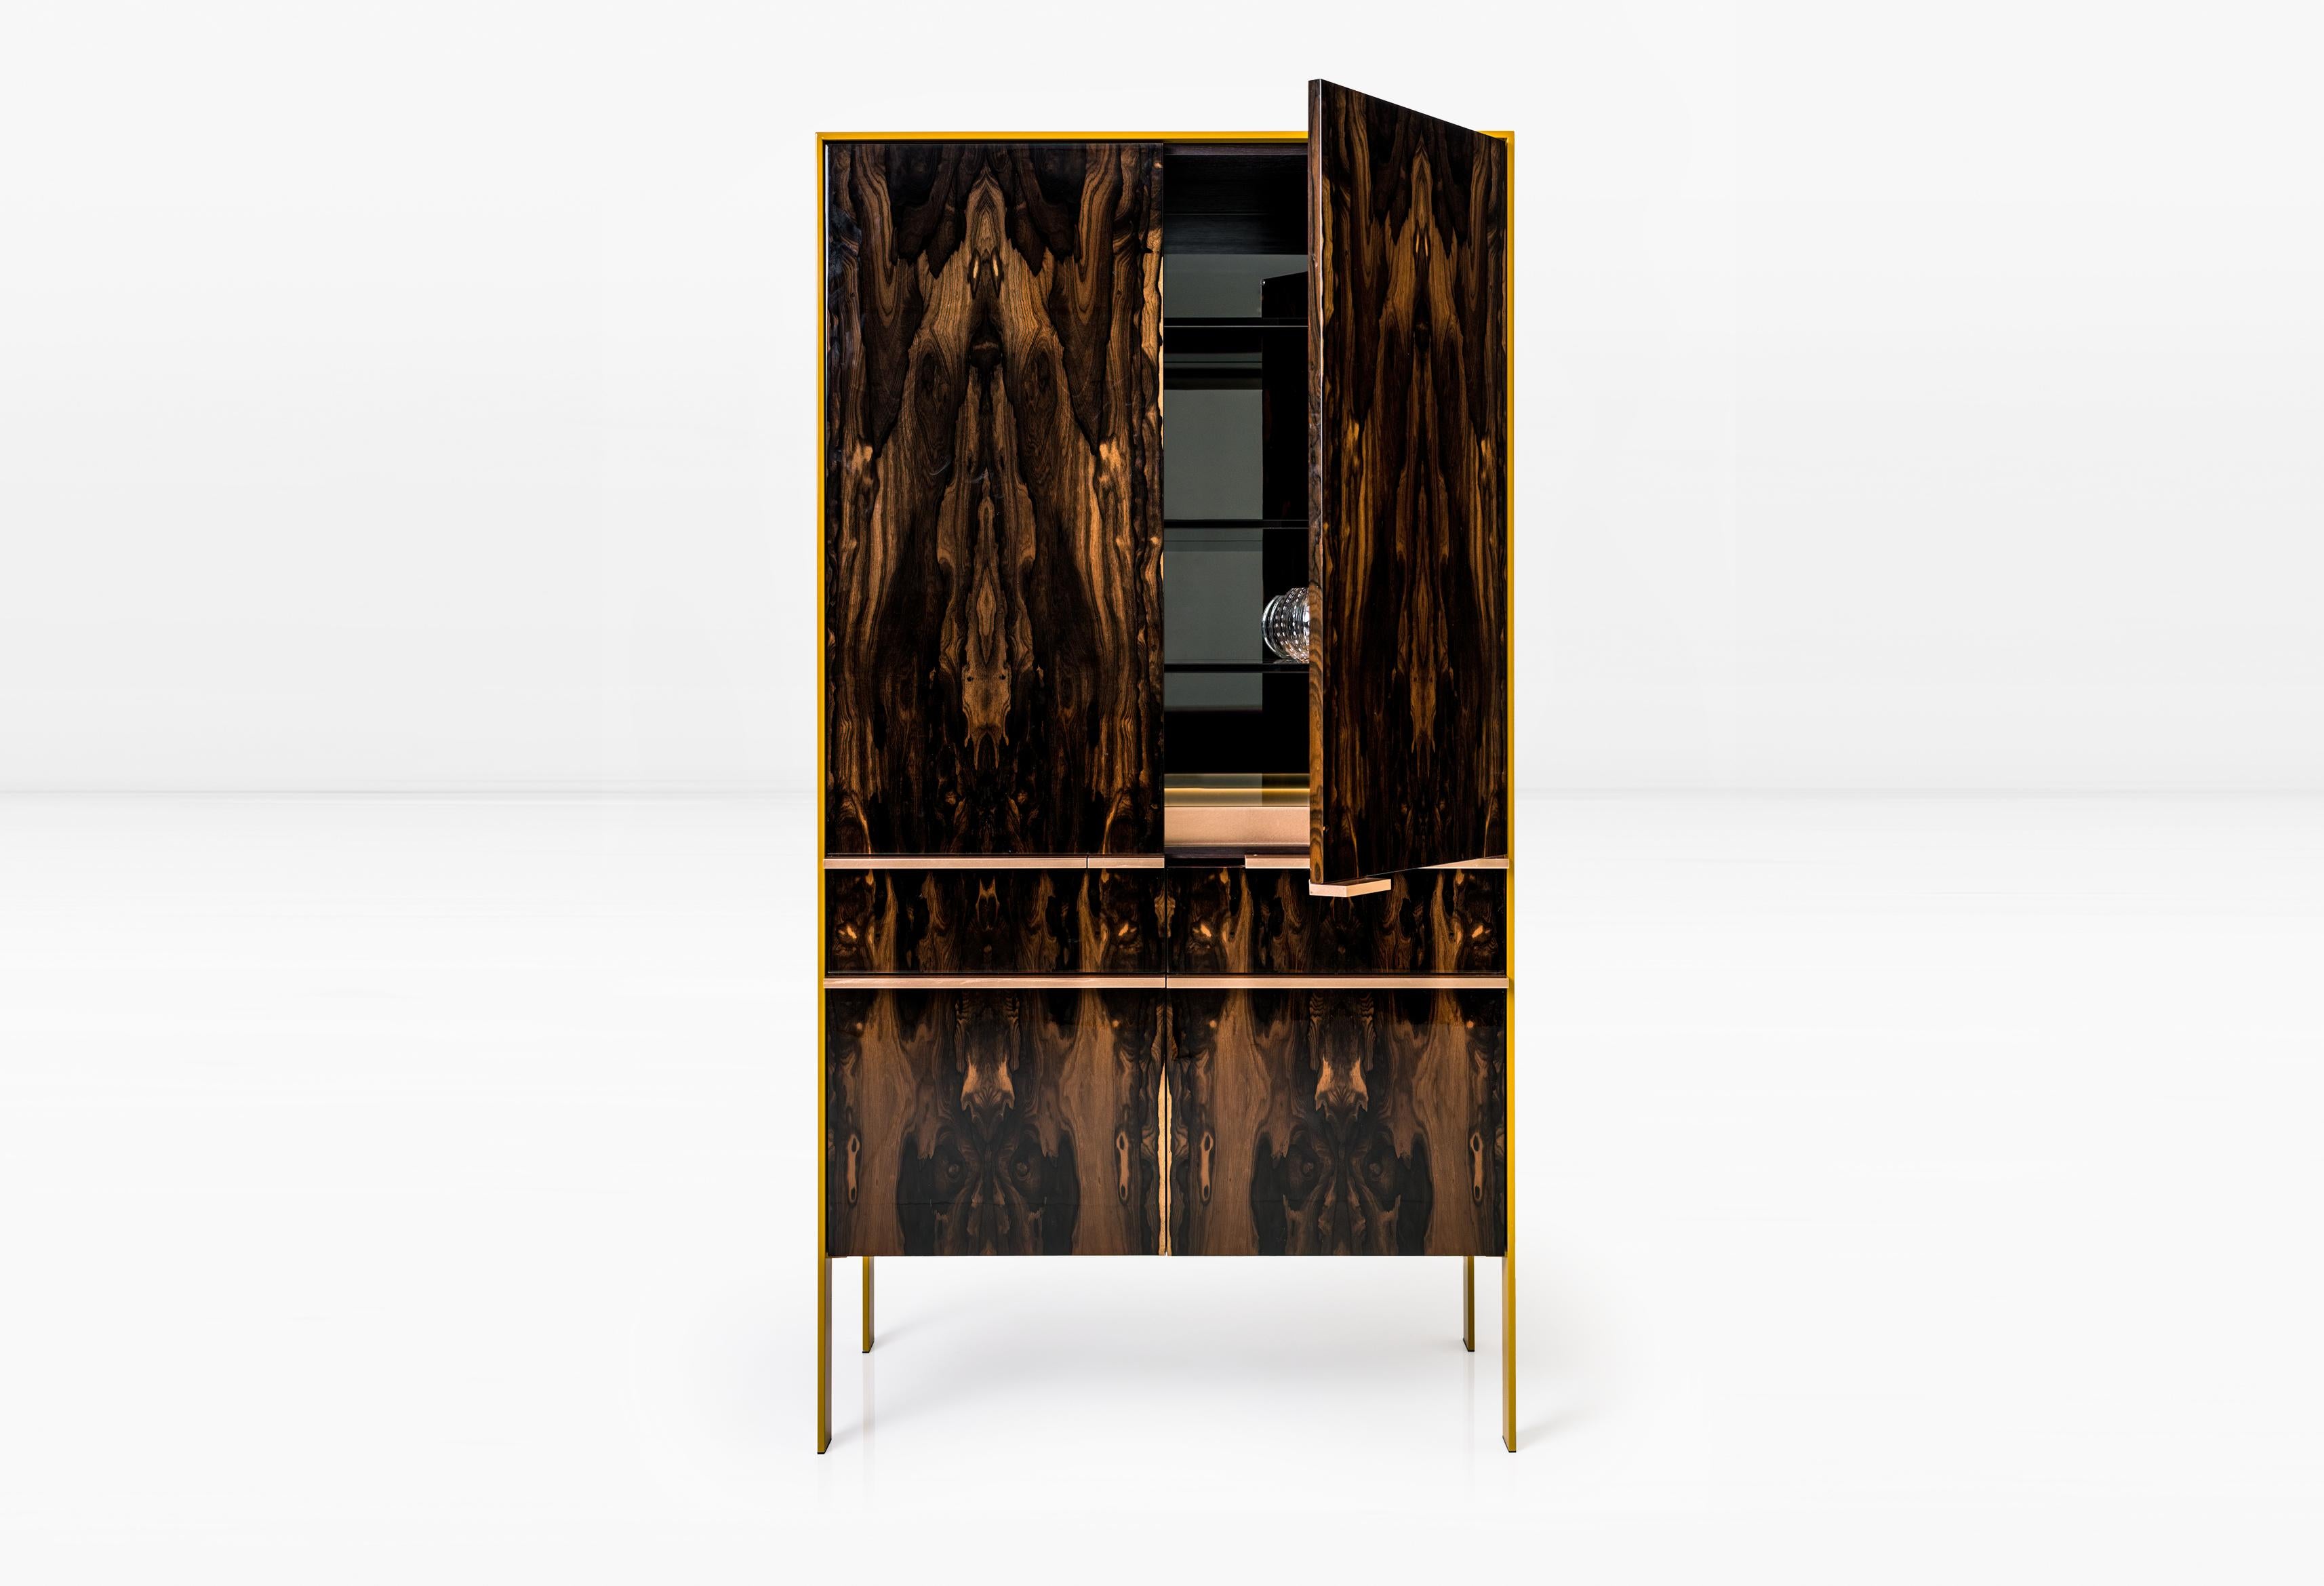 Lacquered aluminum skin encases the Johansson Bar Cabinet constructed of wood veneer exteriors & solid wood interiors and finished on all sides. The cabinet interior features glass shelves, back mirror, and illuminated lower glass lightbox.